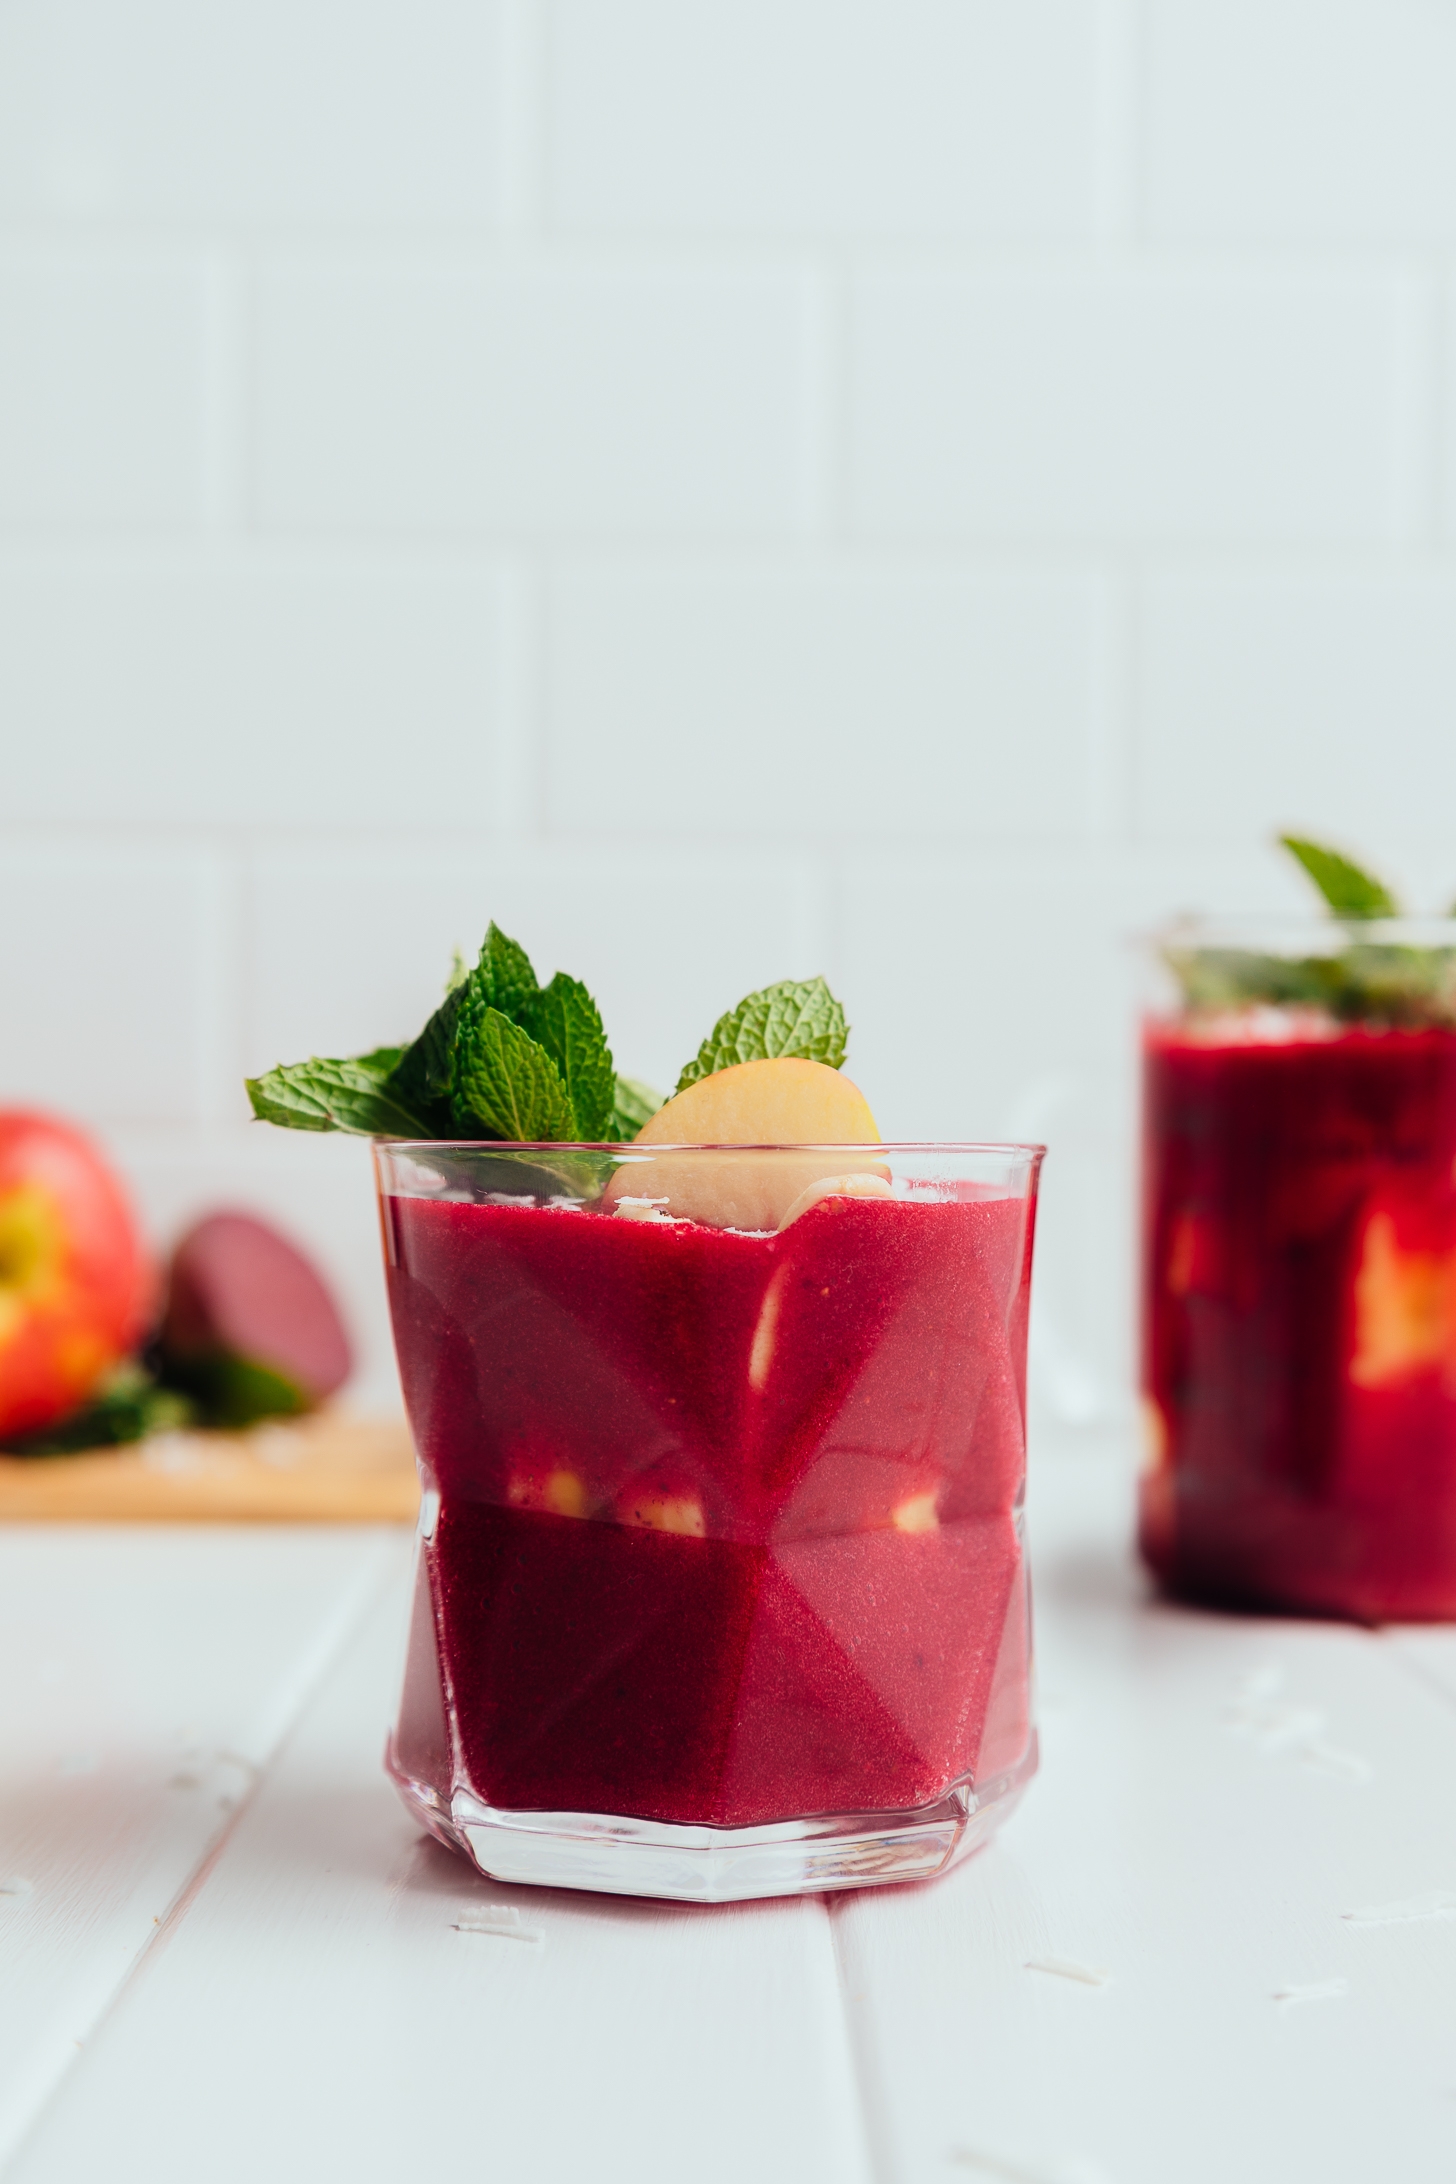 Geometric glass filled with our Beet and Berry Smoothie recipe for a delicious and detoxifying smoothie recipe